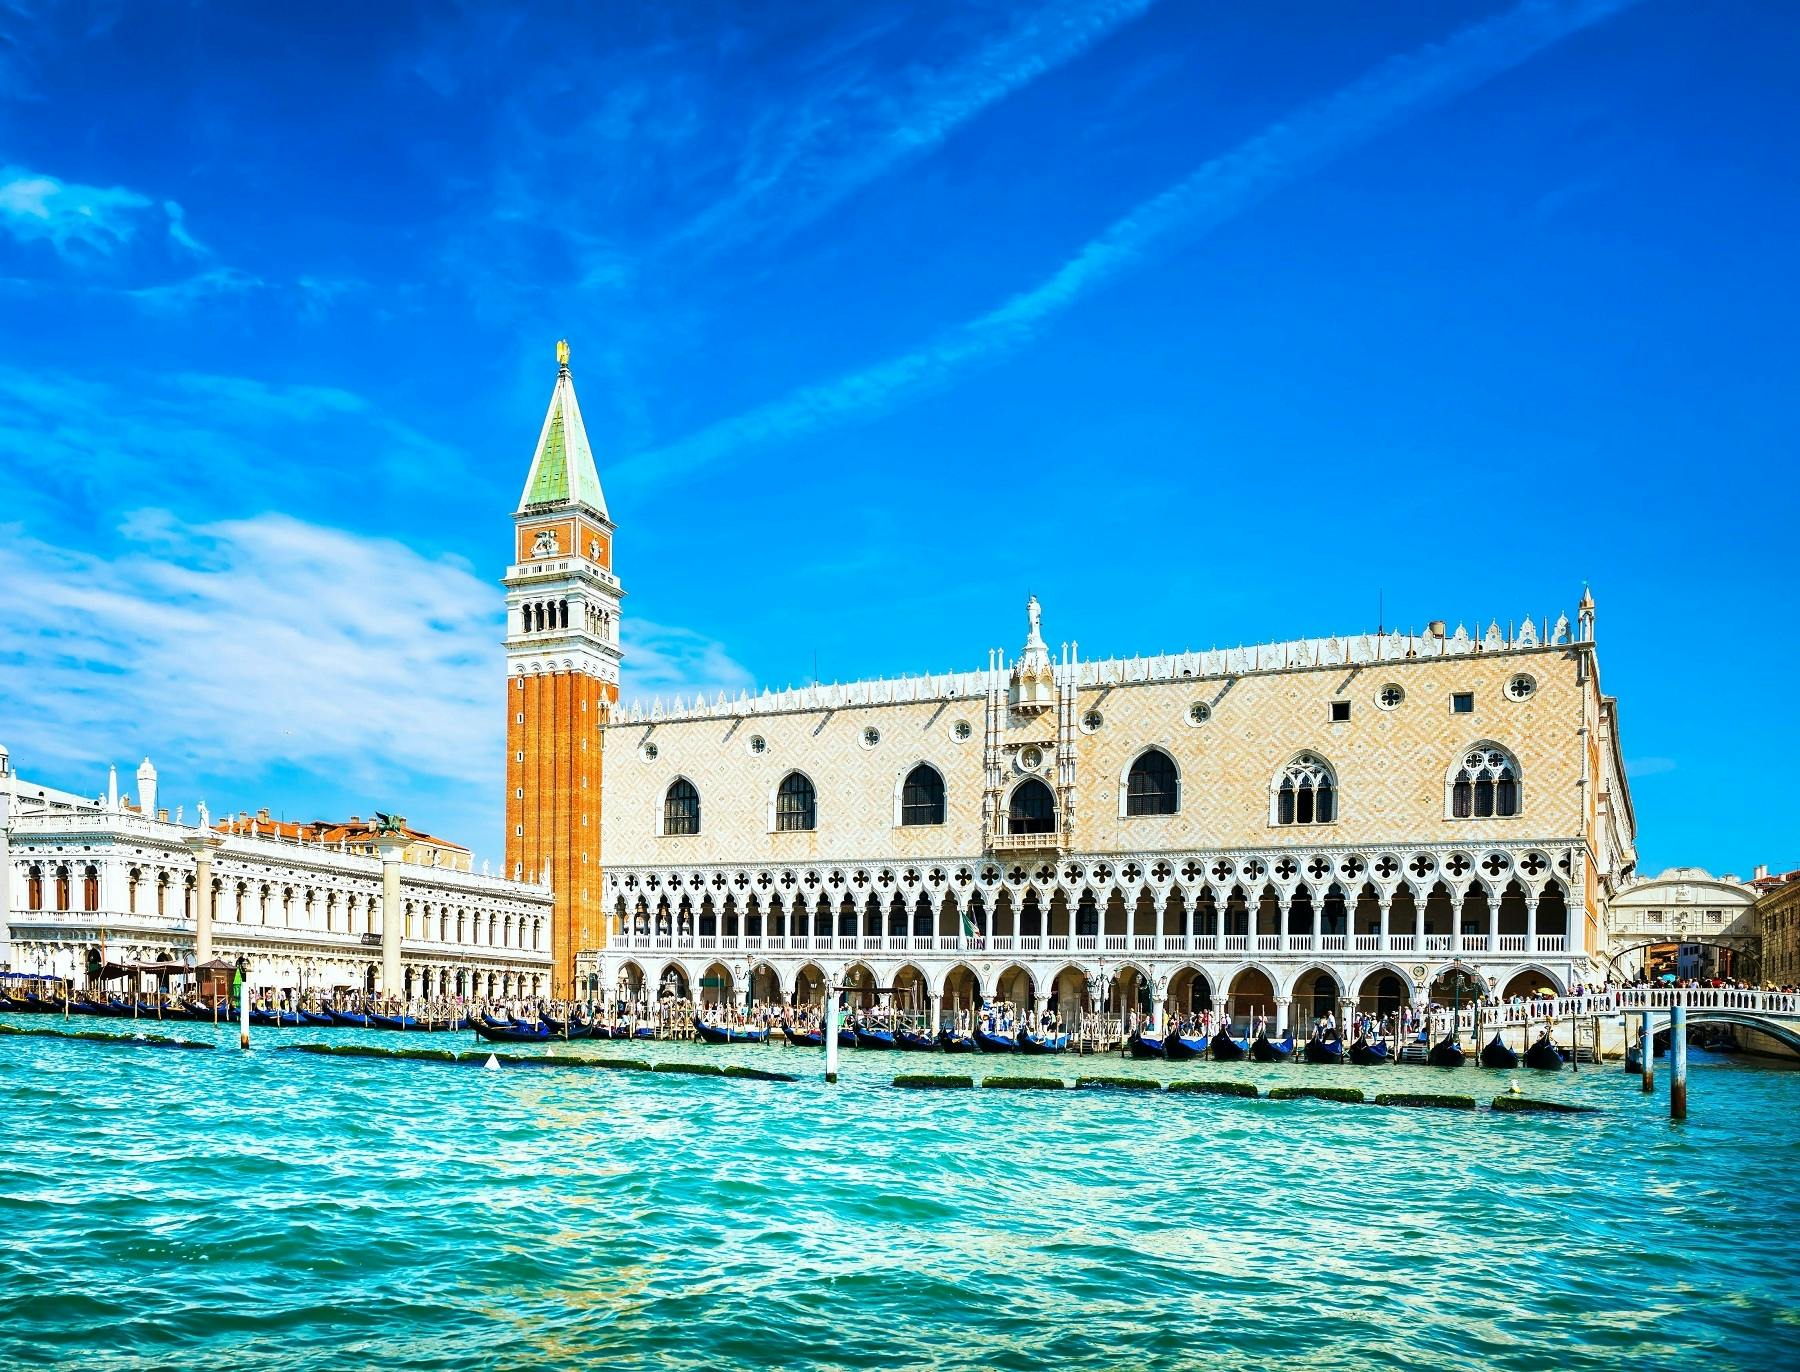 St. Mark's city pass with free museum entrances and discounts